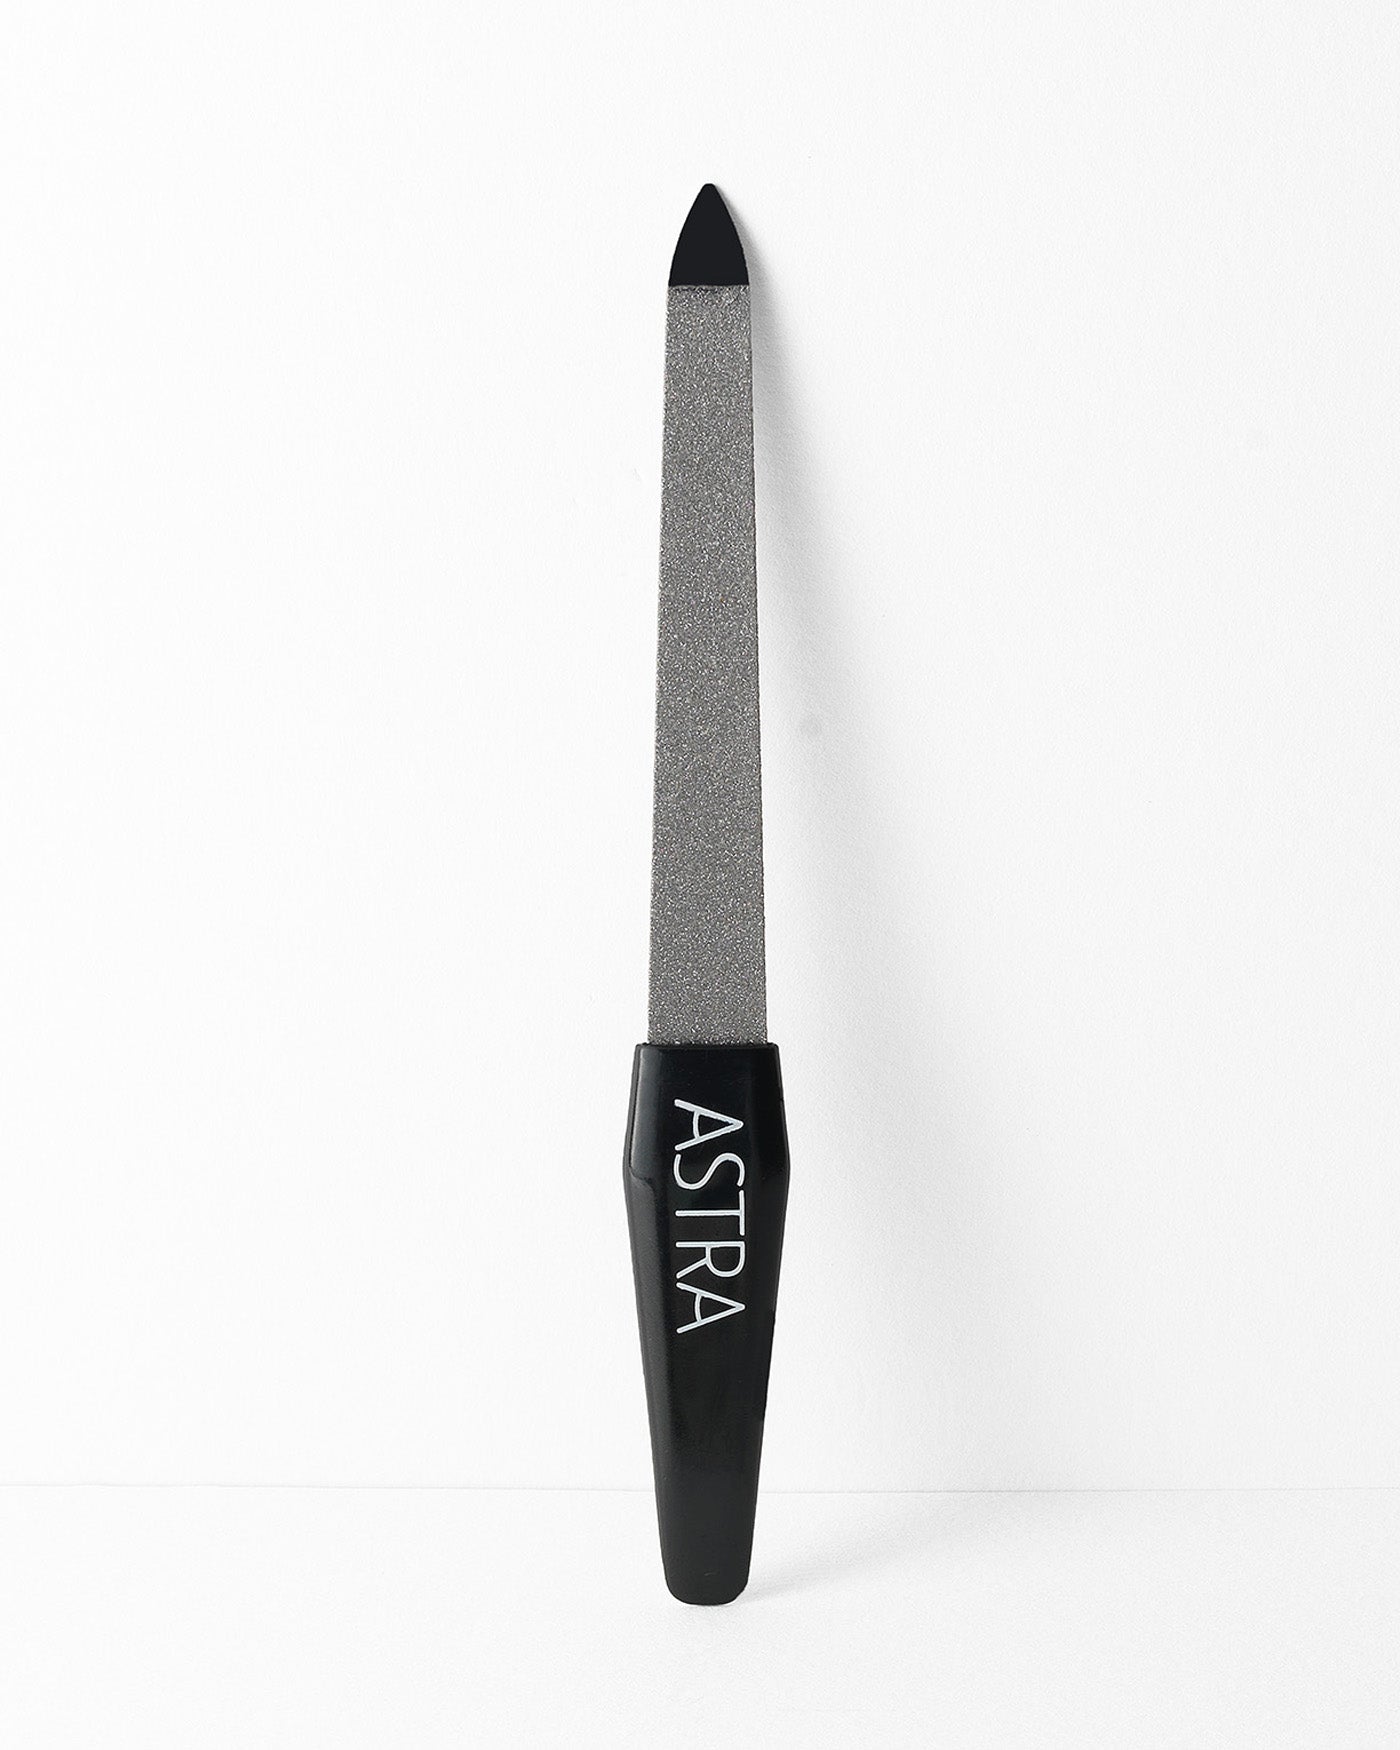 NAIL FILE - Lima Unghie in Acciaio - Mani - Astra Make-Up